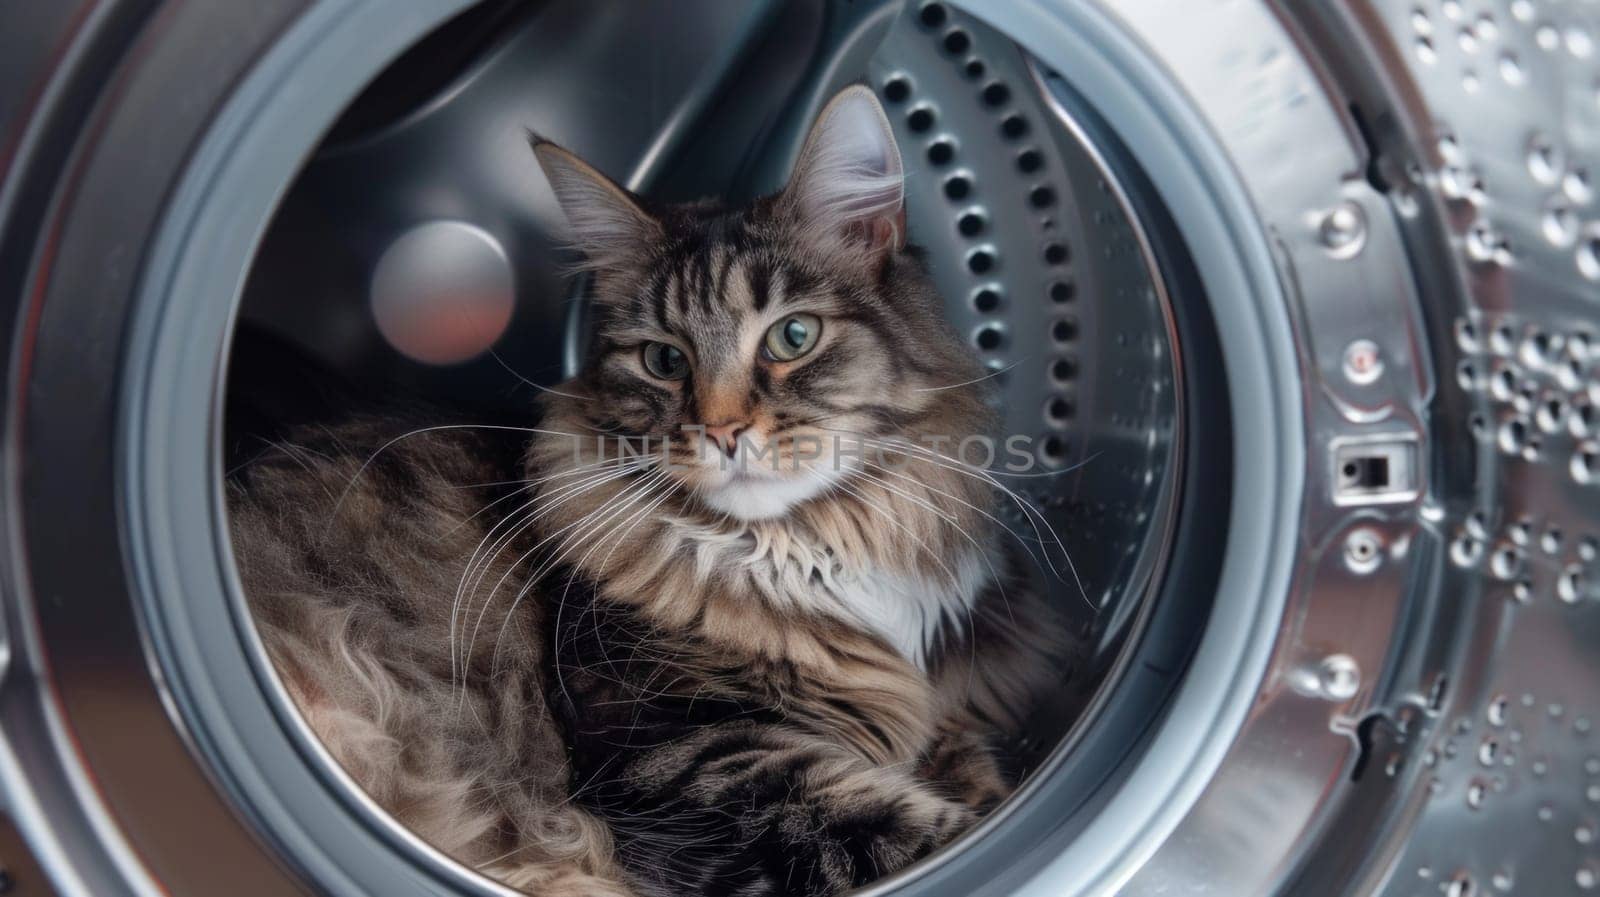 A fluffy cat comfortably nestled inside the drum of a washing machine, looking out curiously at its surroundings by but_photo